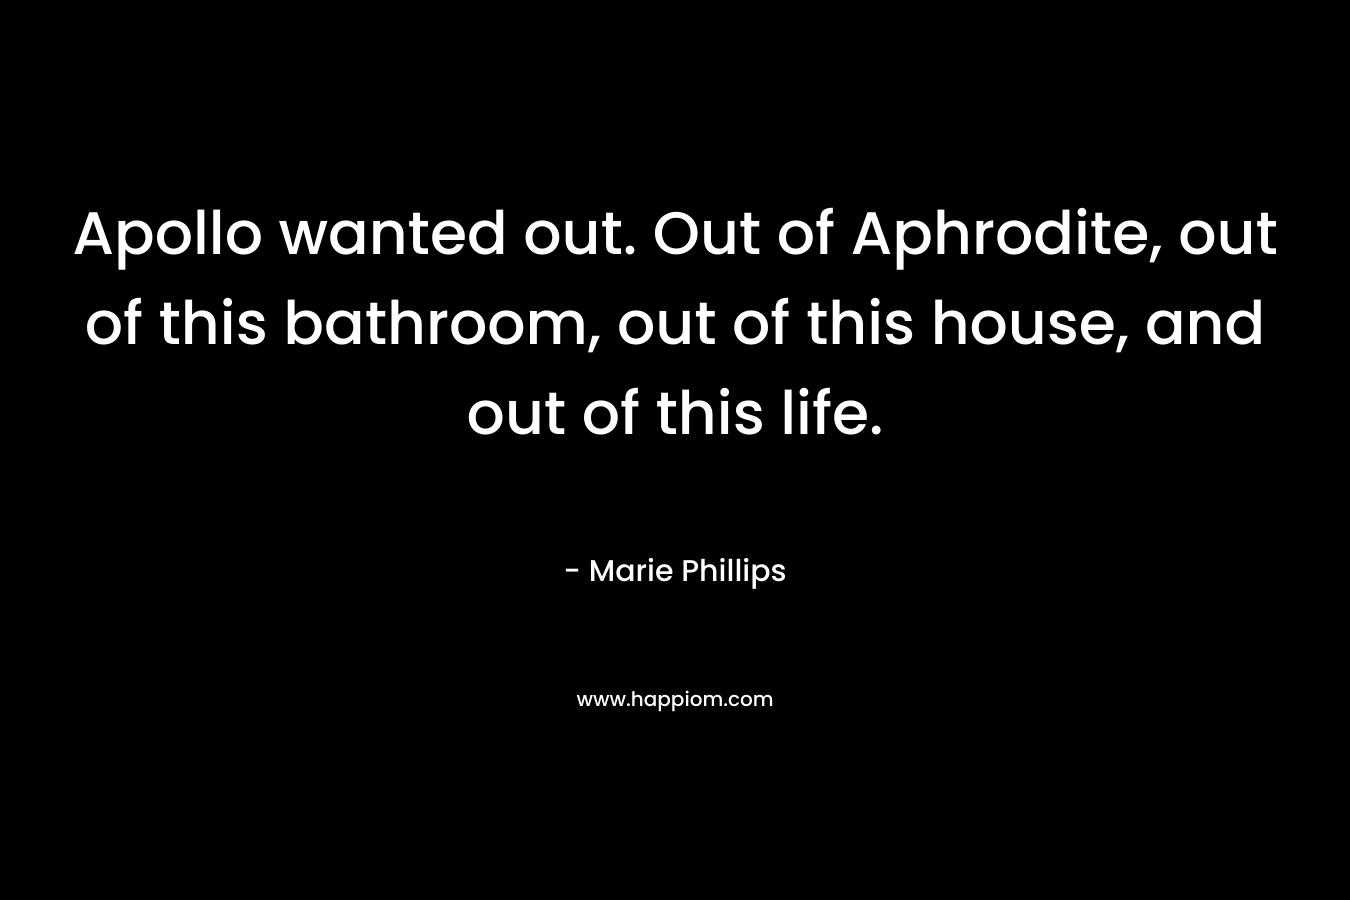 Apollo wanted out. Out of Aphrodite, out of this bathroom, out of this house, and out of this life.